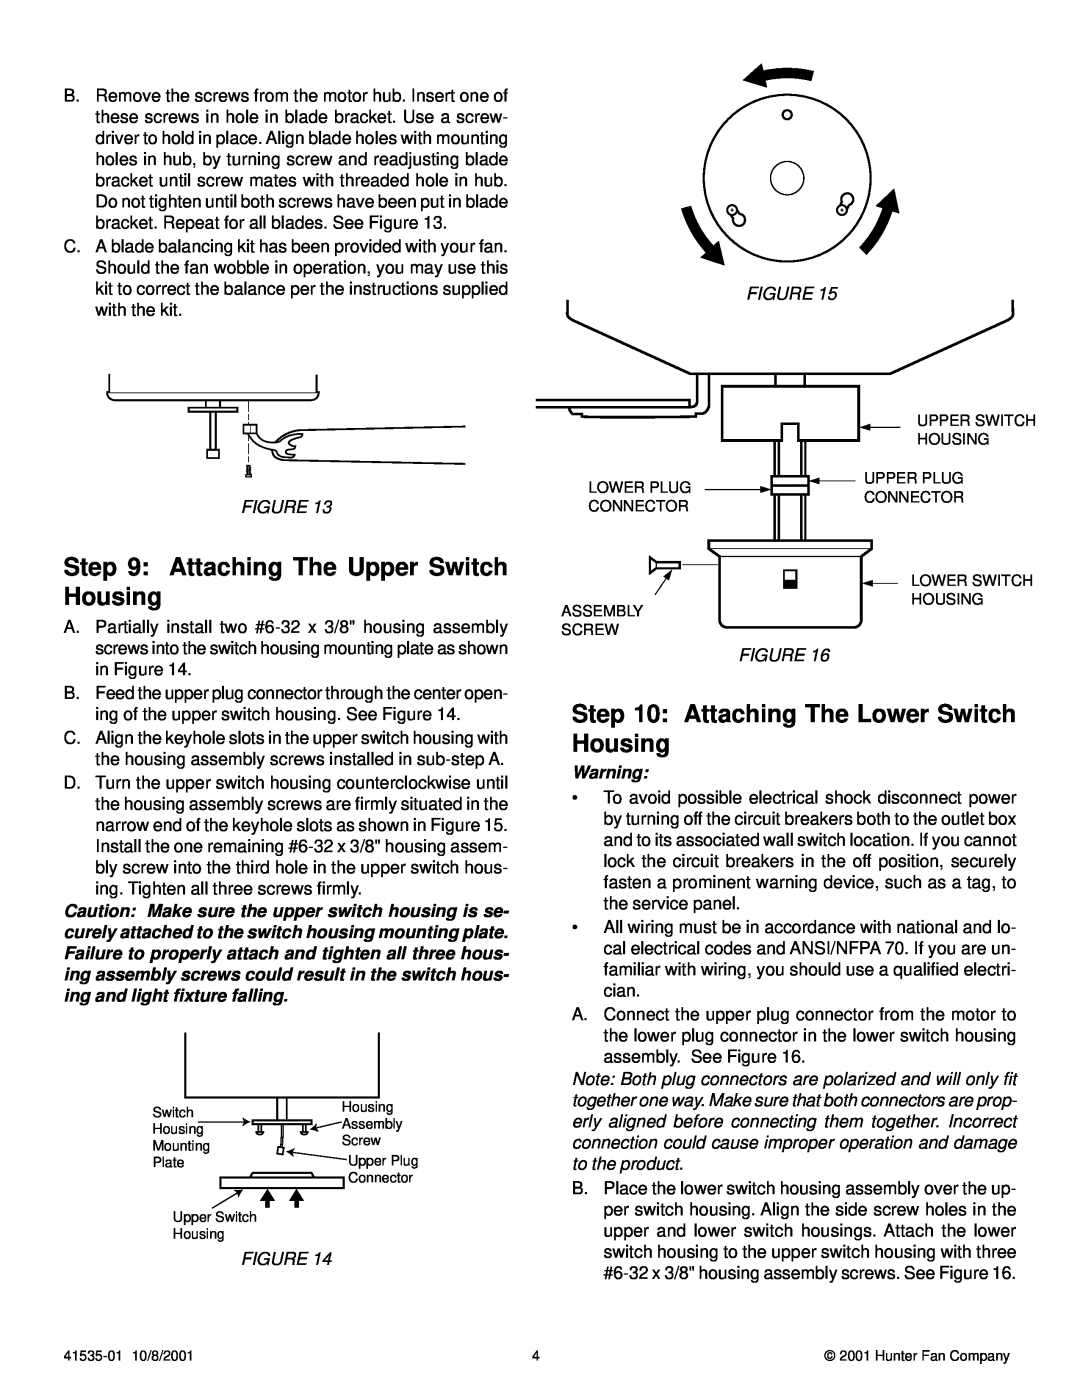 Hunter Fan 41535-01 installation instructions Attaching The Upper Switch Housing, Attaching The Lower Switch Housing 